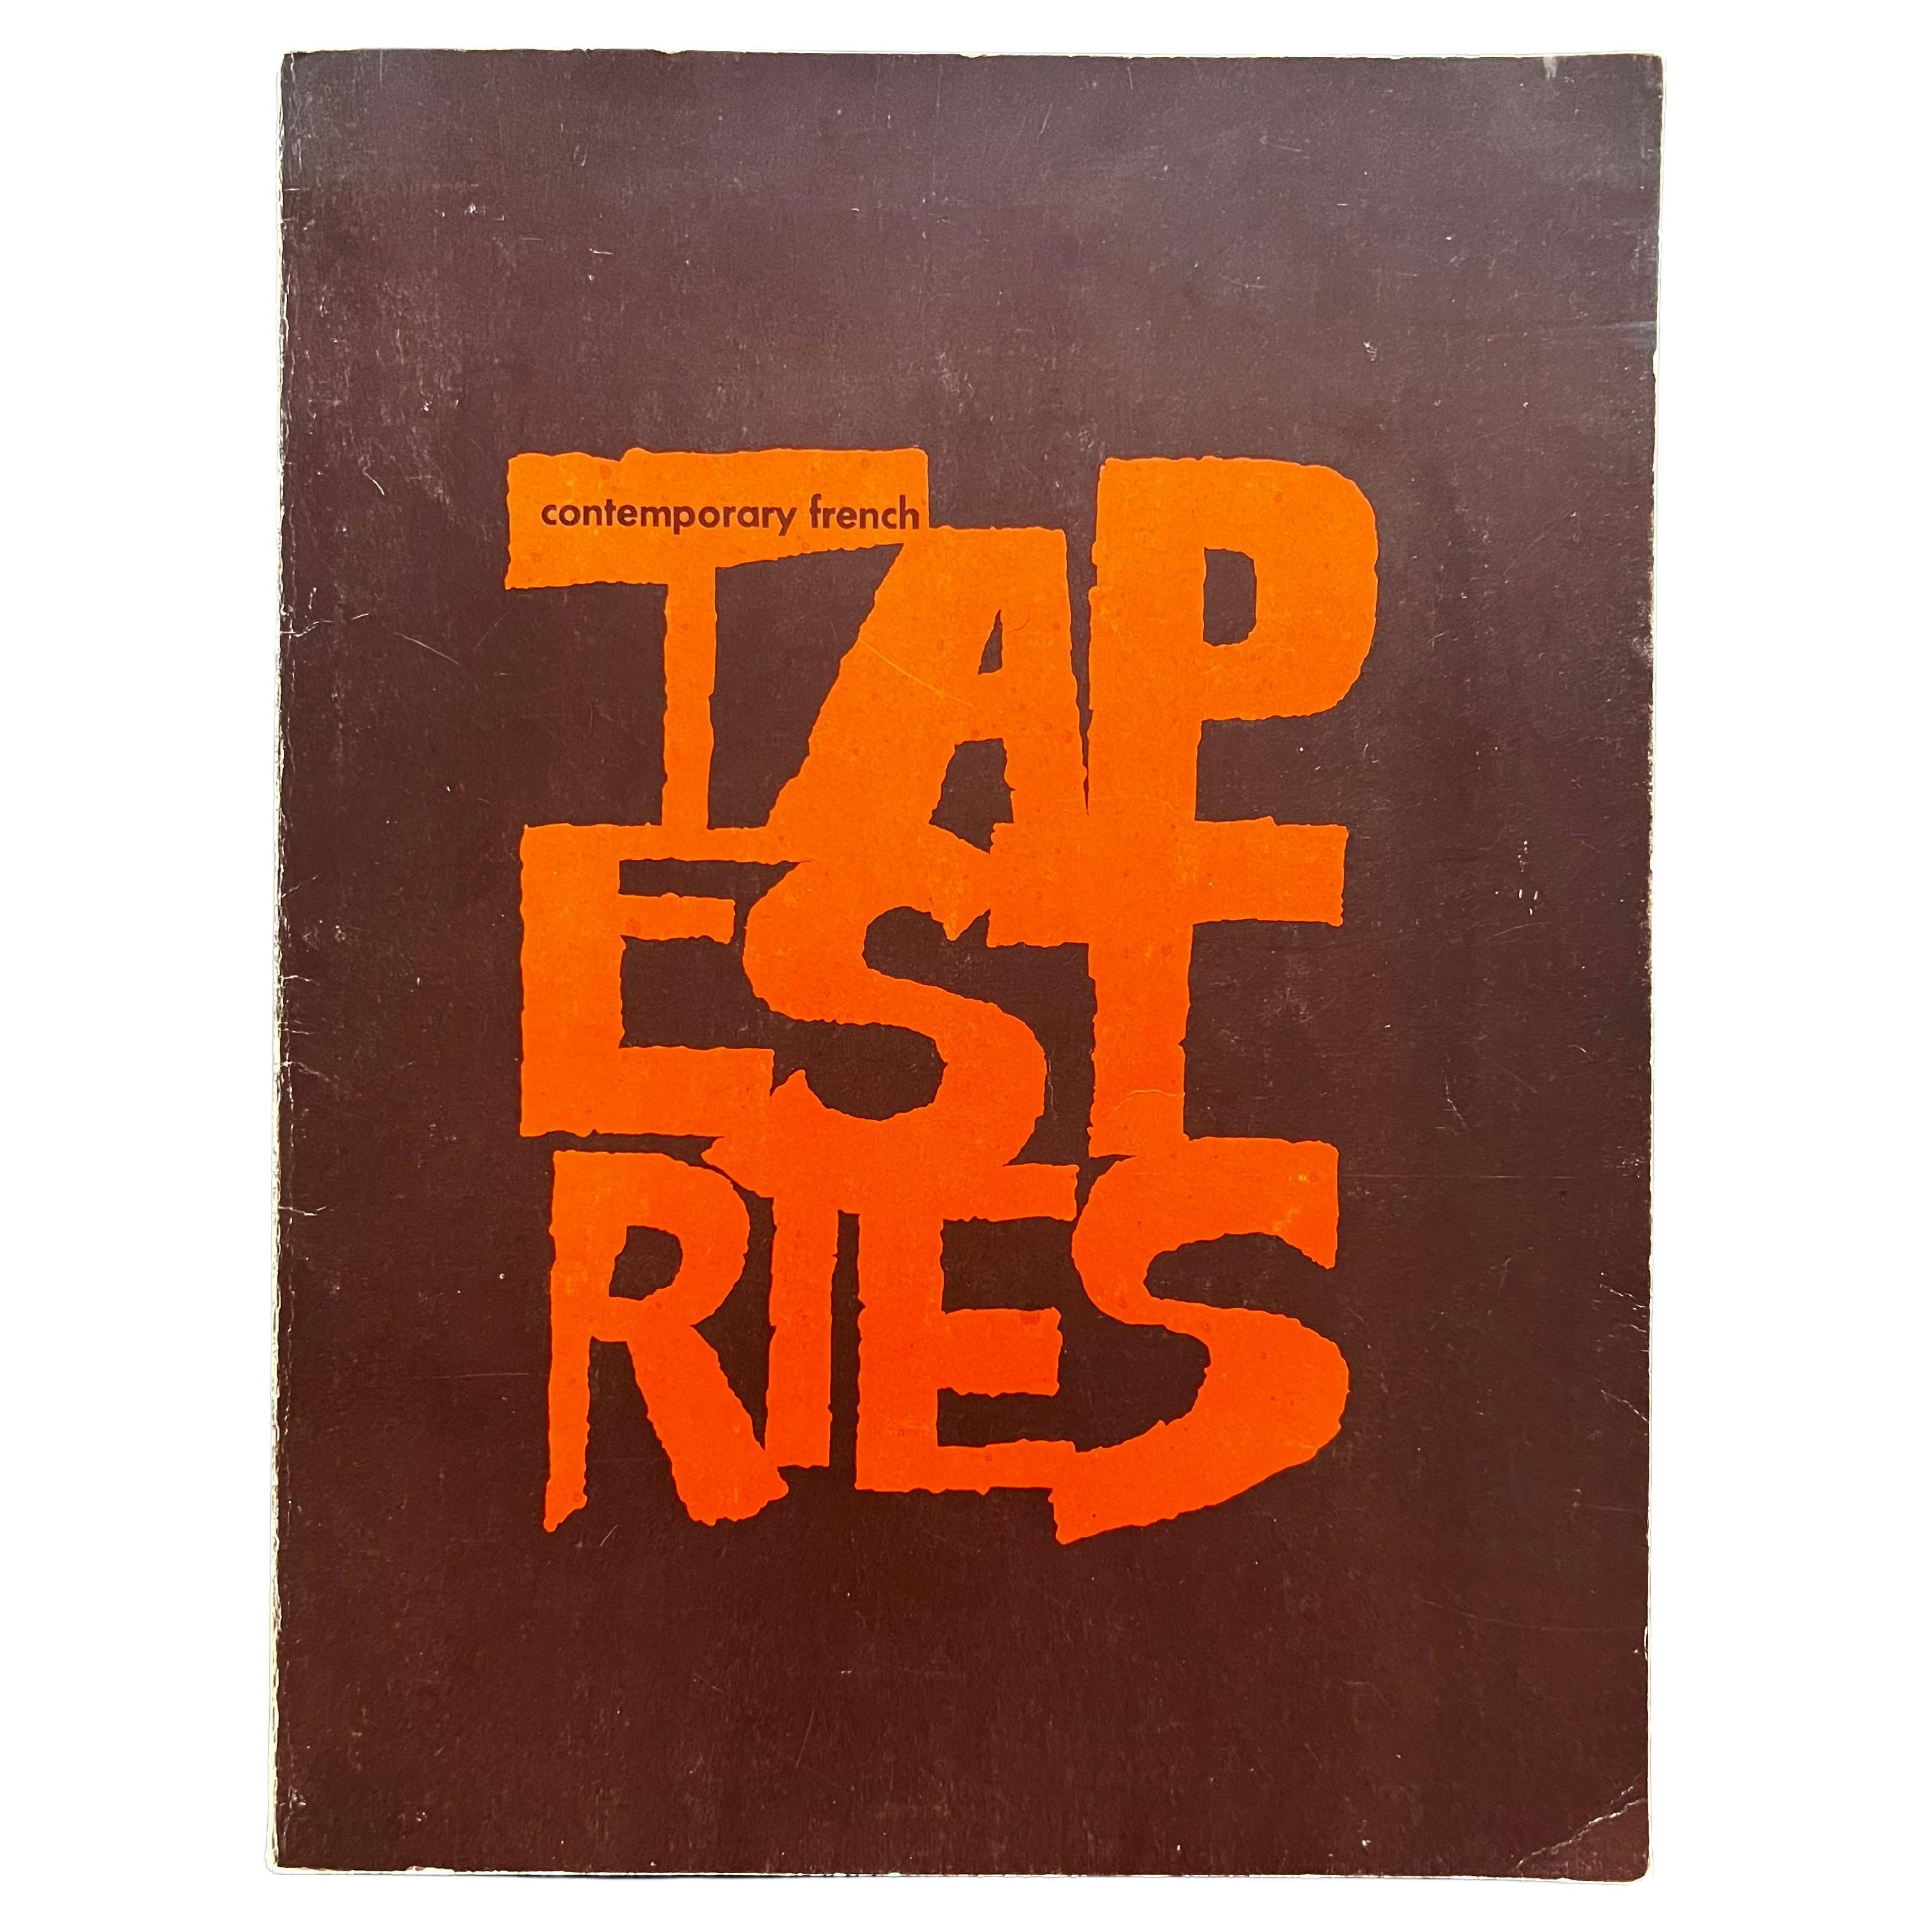 Contemporary French Tapestries, rare and collectible coffee table book, 1966 For Sale